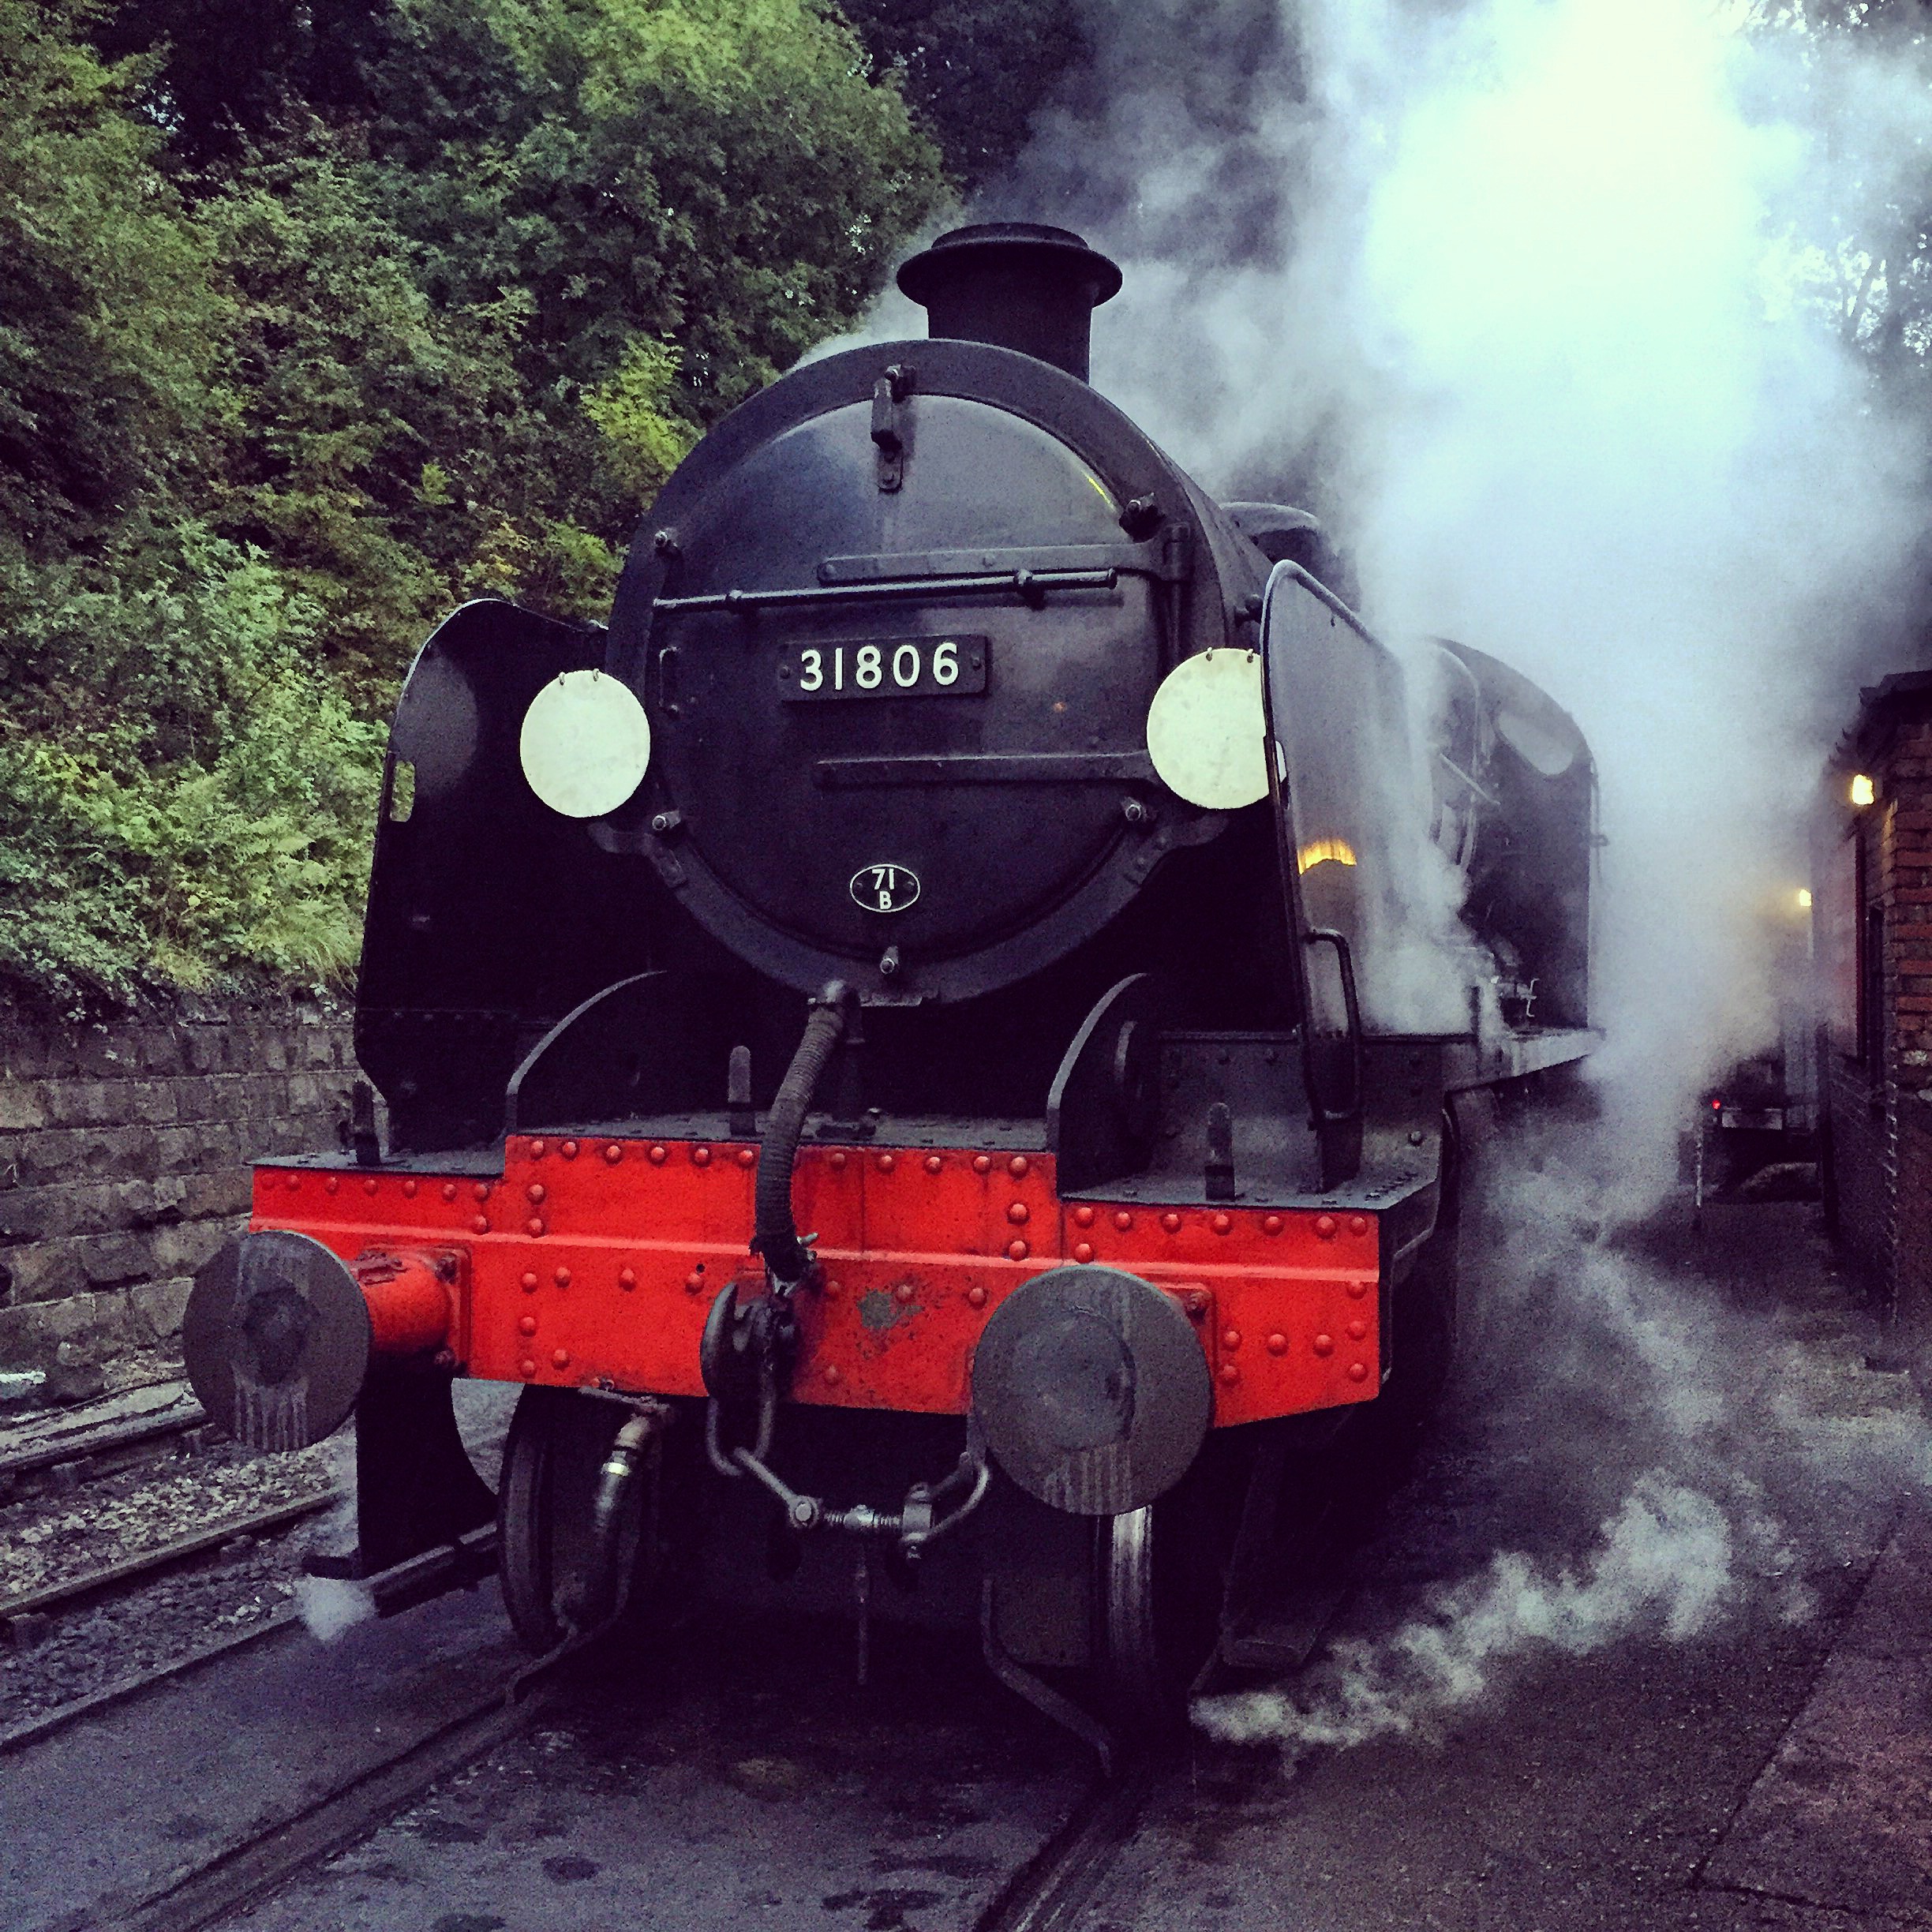 31806 waiting to leave Grosmont shed ahead of the morning photo charter on 26/09/15.